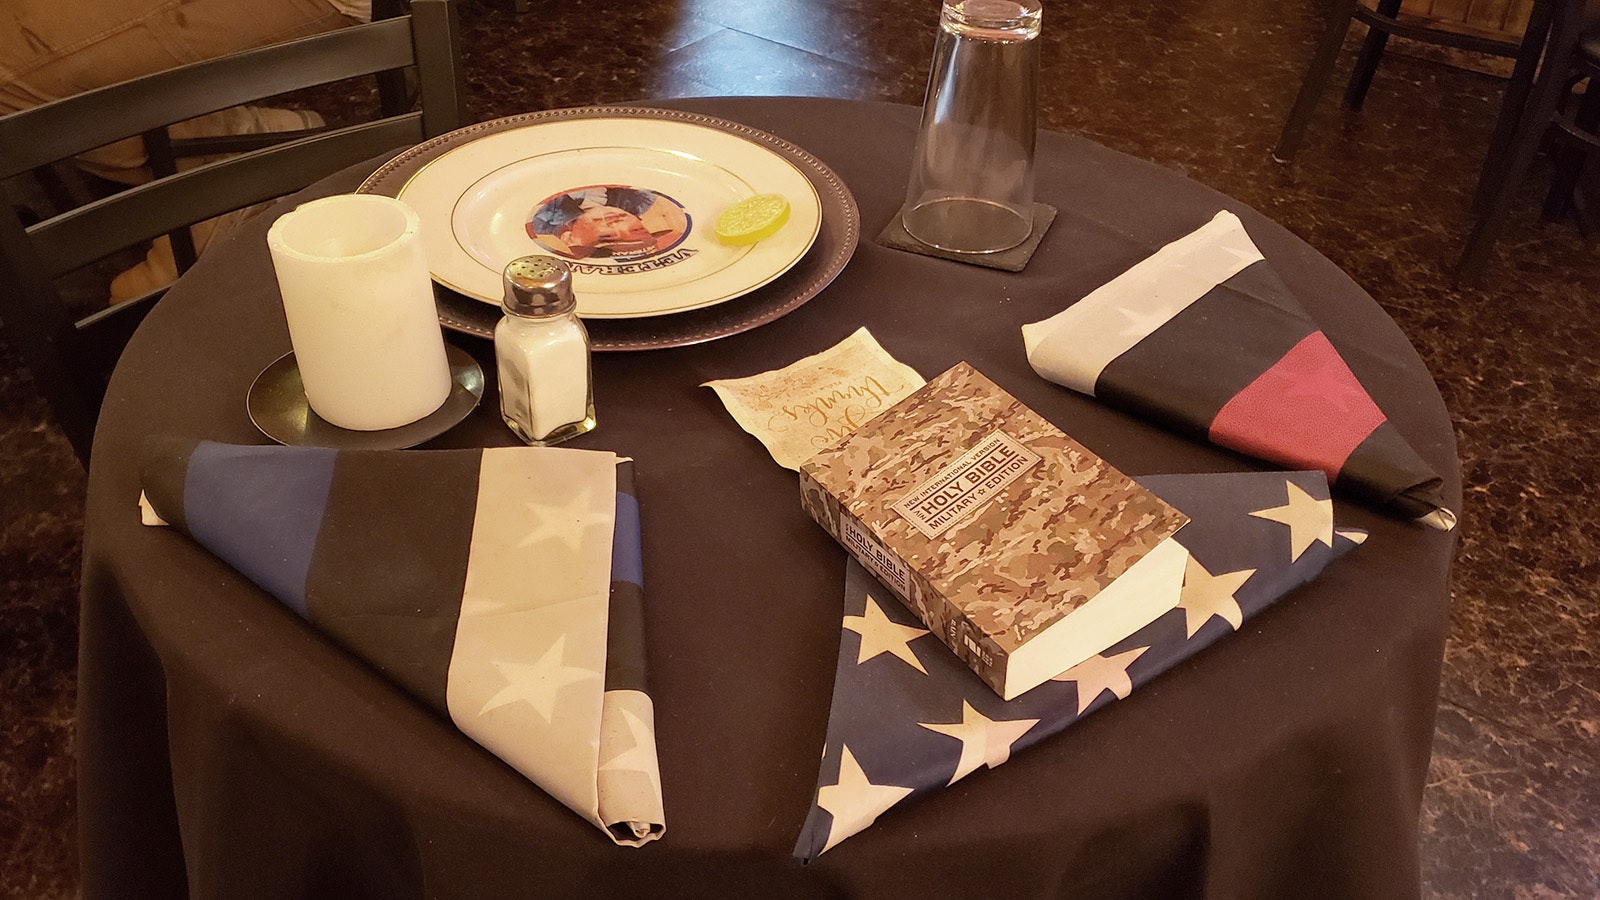 A "missing man" table is set in recognition of military service and sacrifice above and beyond the call of duty.